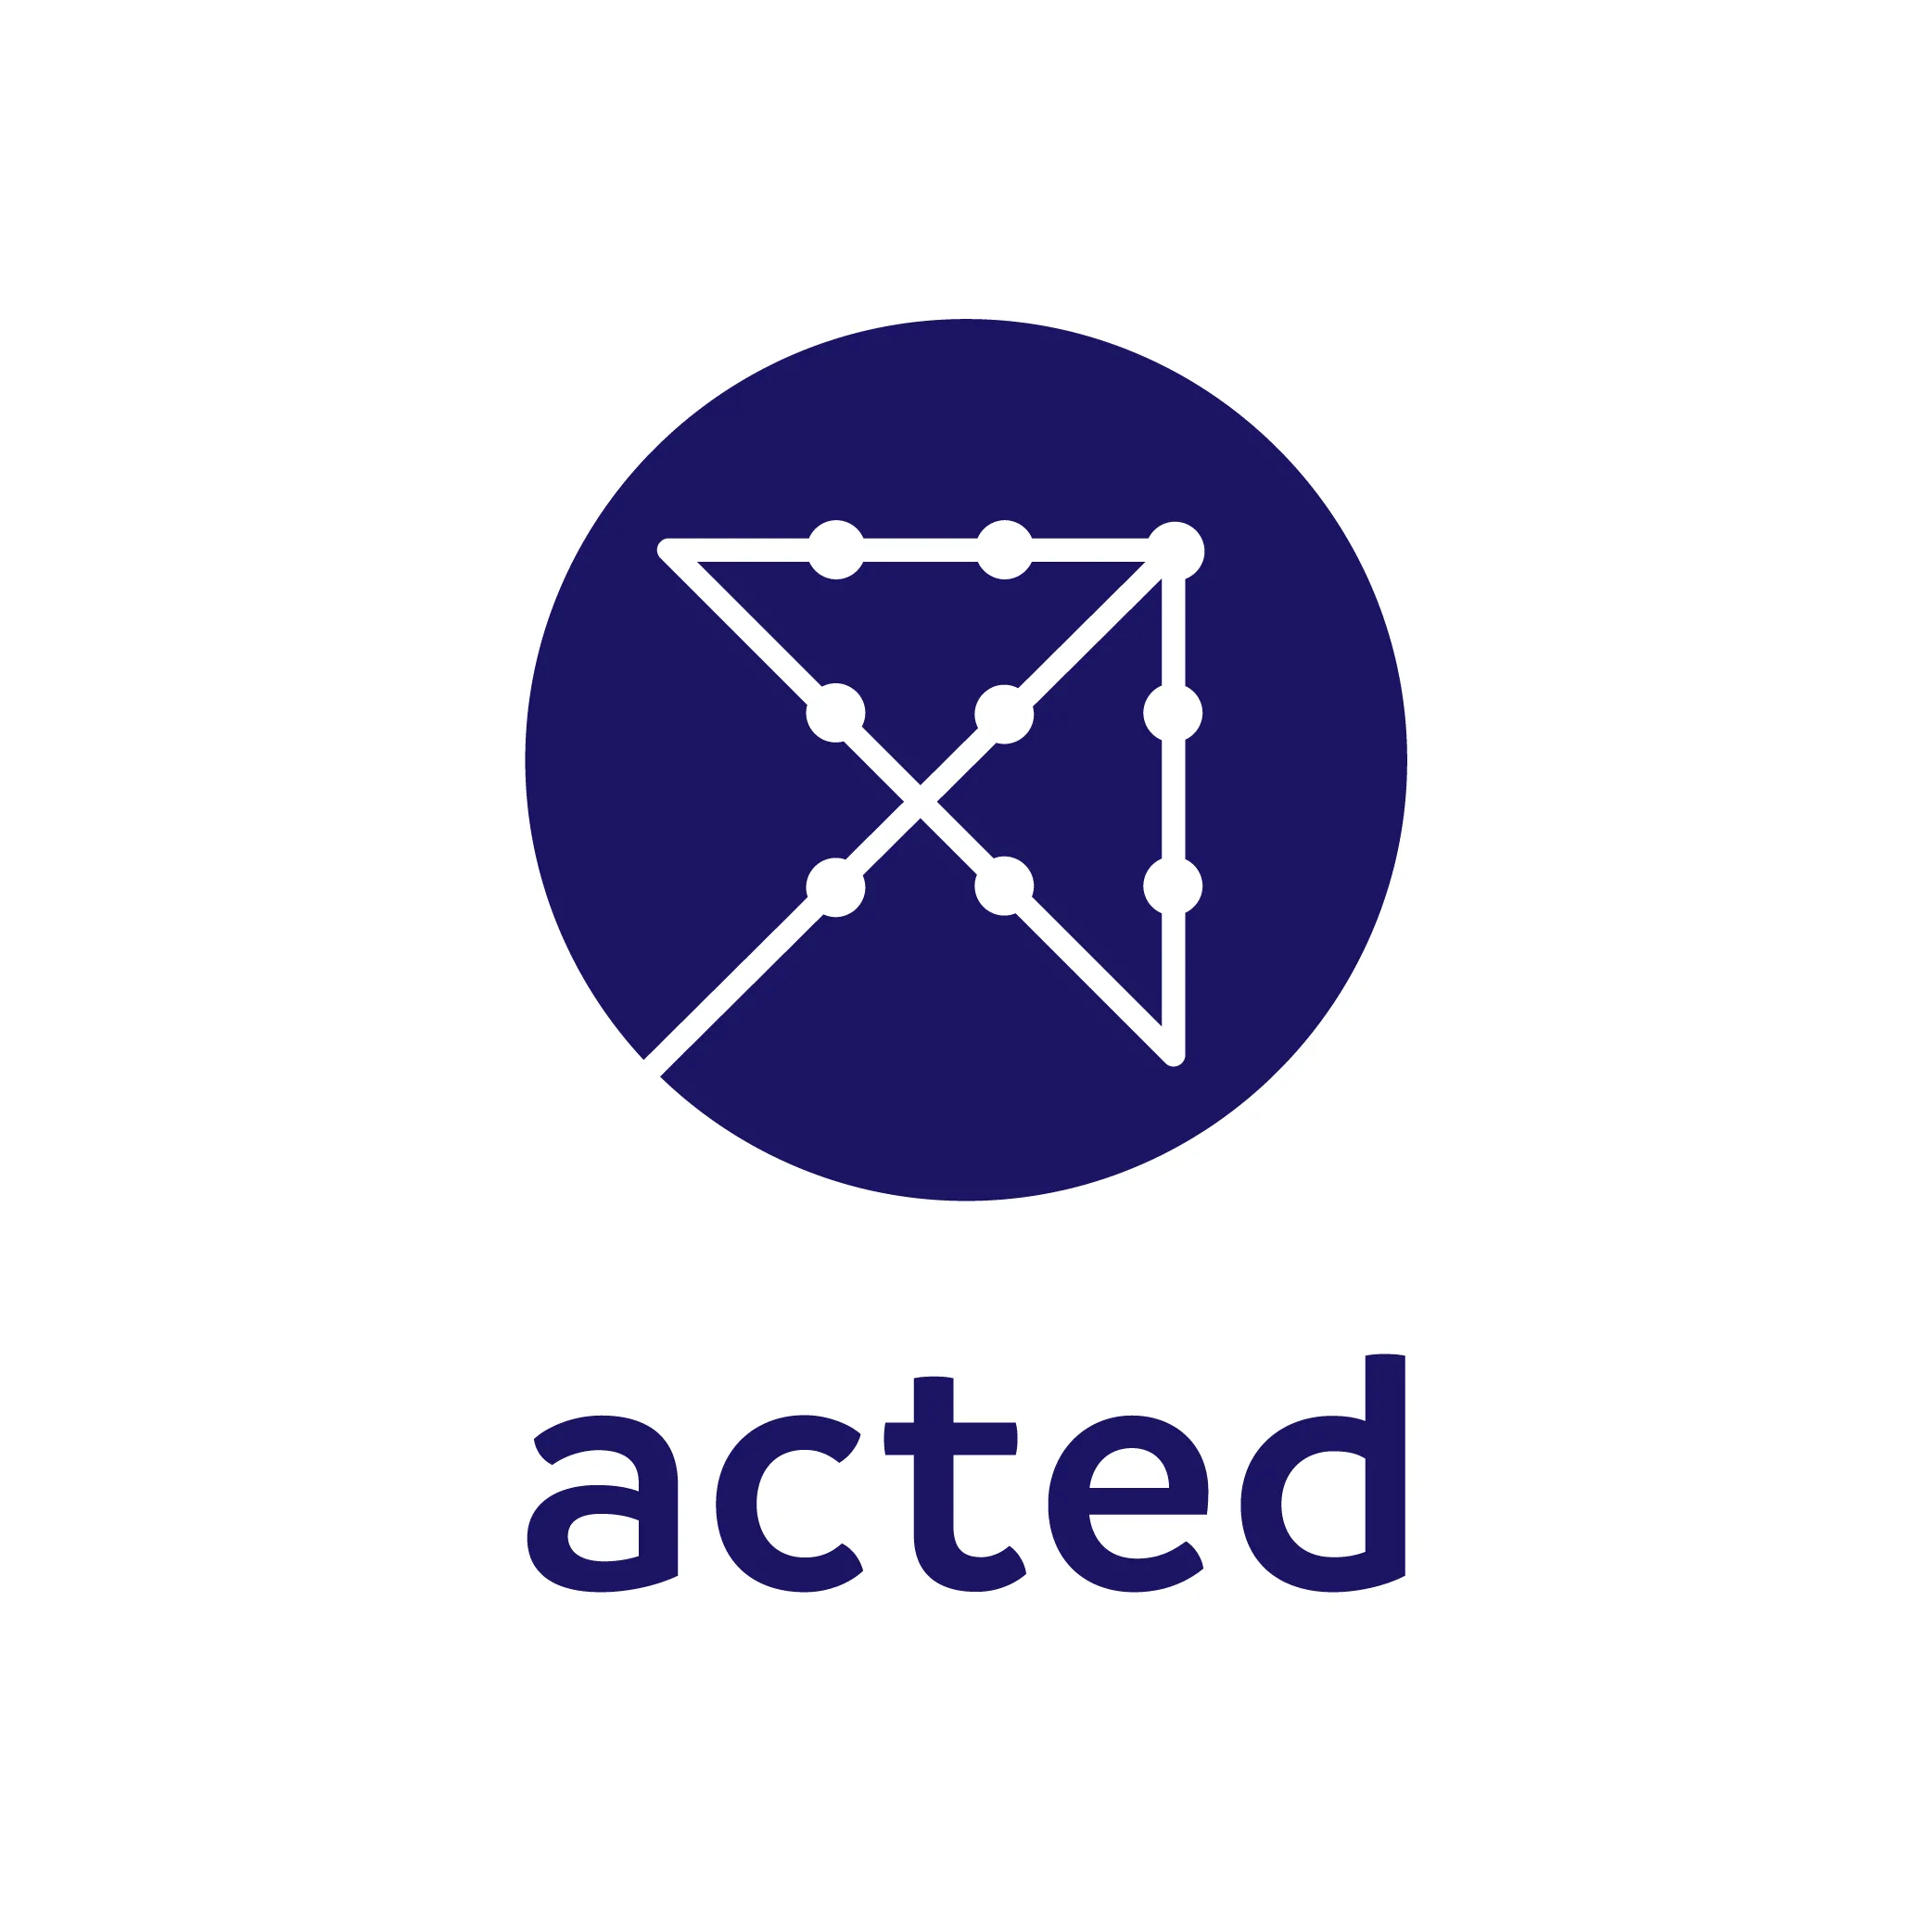 Logo for Acted, word "acted" in navy blue